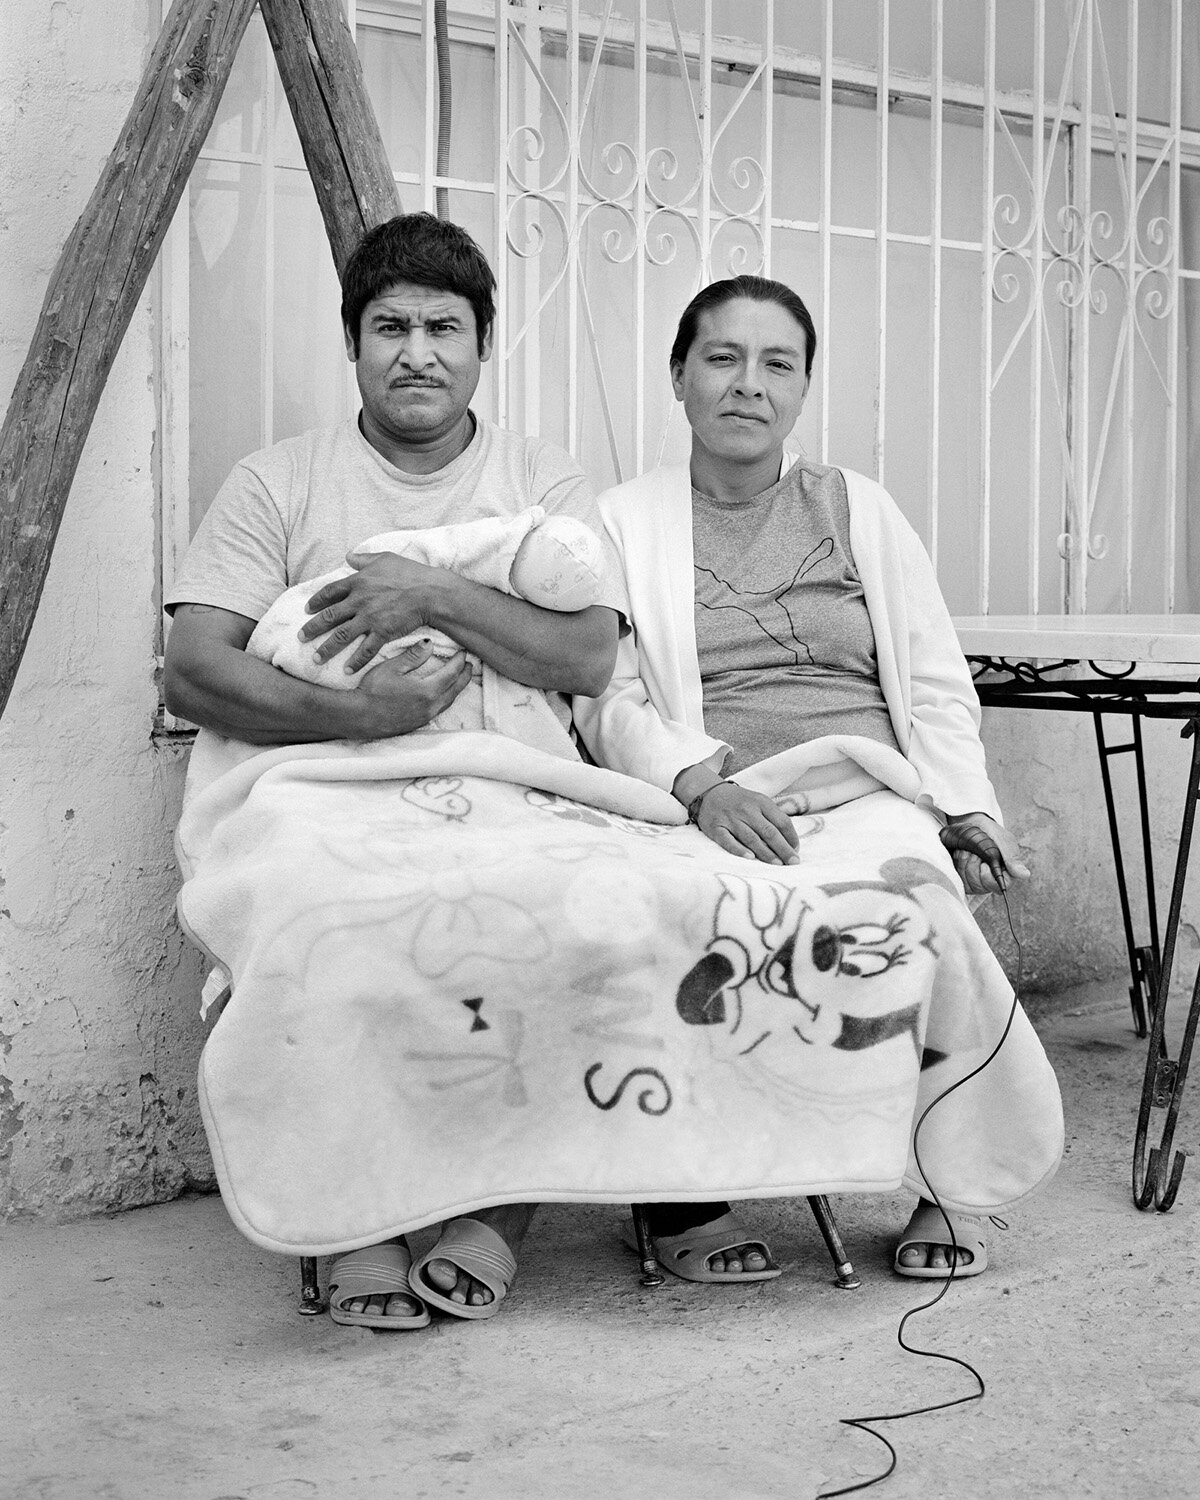  Victor Castro, 41, and Gertrudis Ortega, 38, with their 1-month-old daughter, Betani, from Ometepec, Mexico, at the Good Samaritan migrant shelter in Ciudad Juárez. Photograph by Gertrudis Ortega and Adam Ferguson 